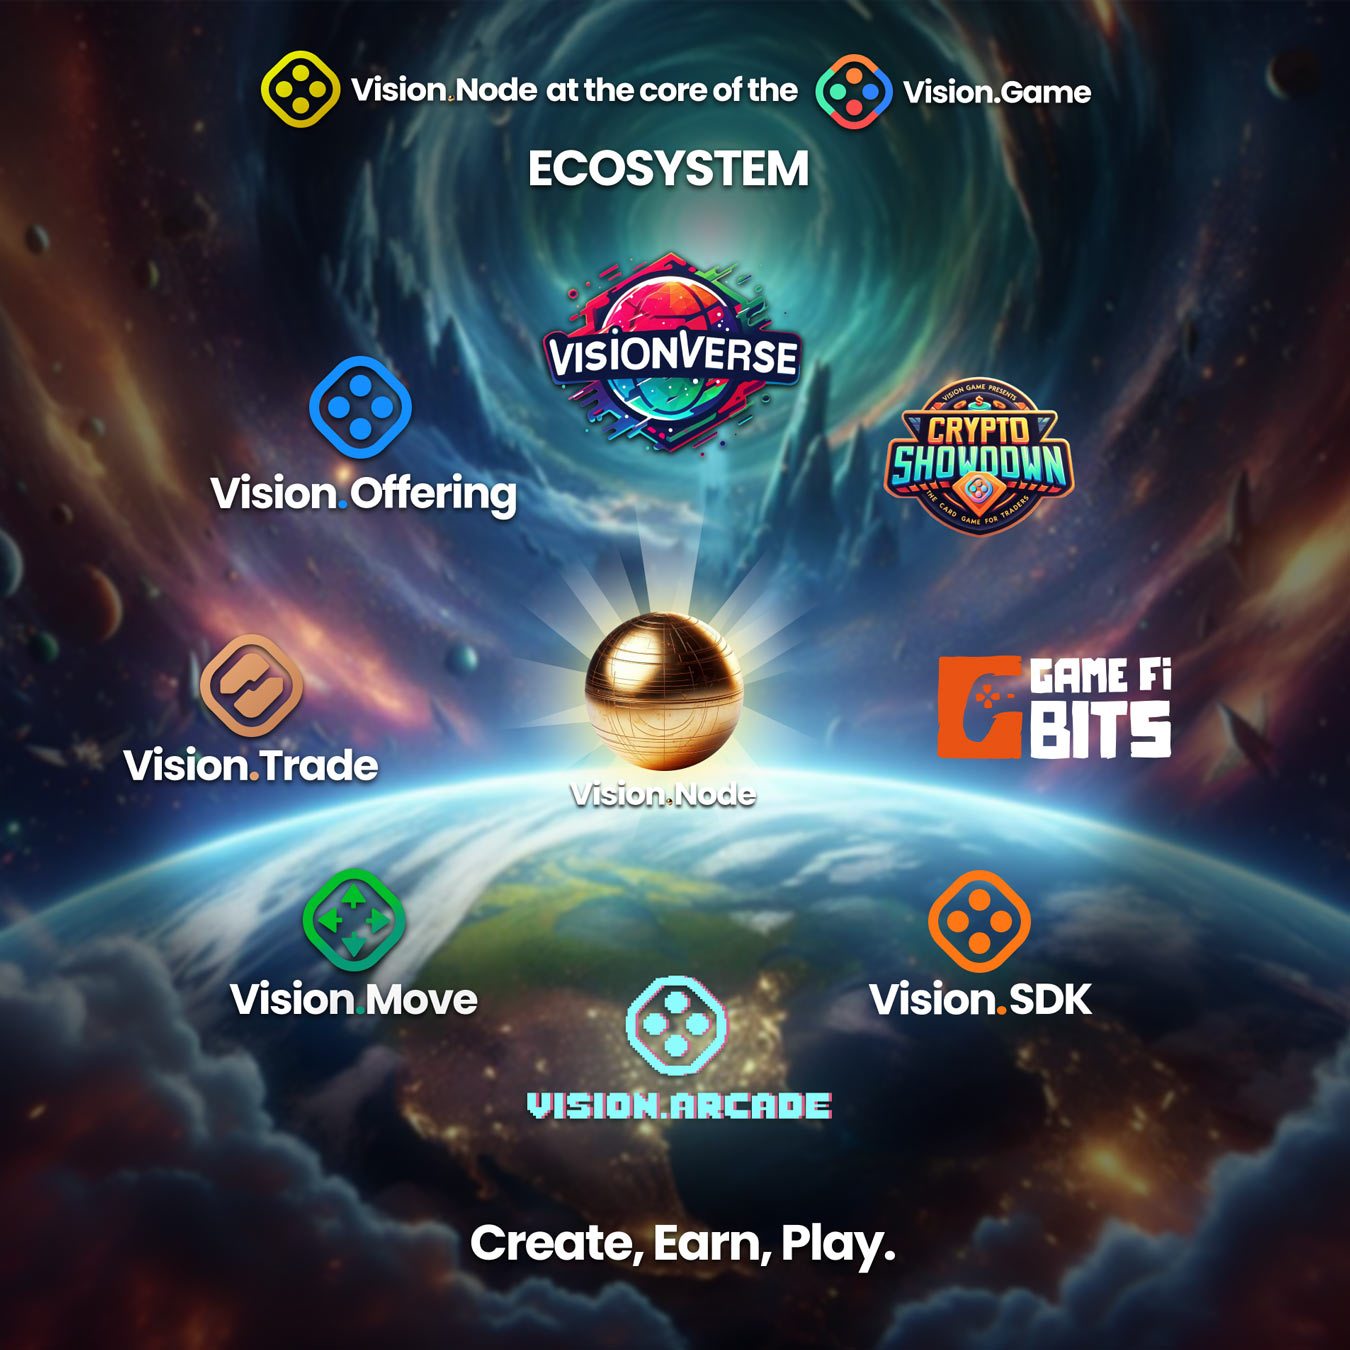 VisionNode at the core of the VisionGame ecosystem